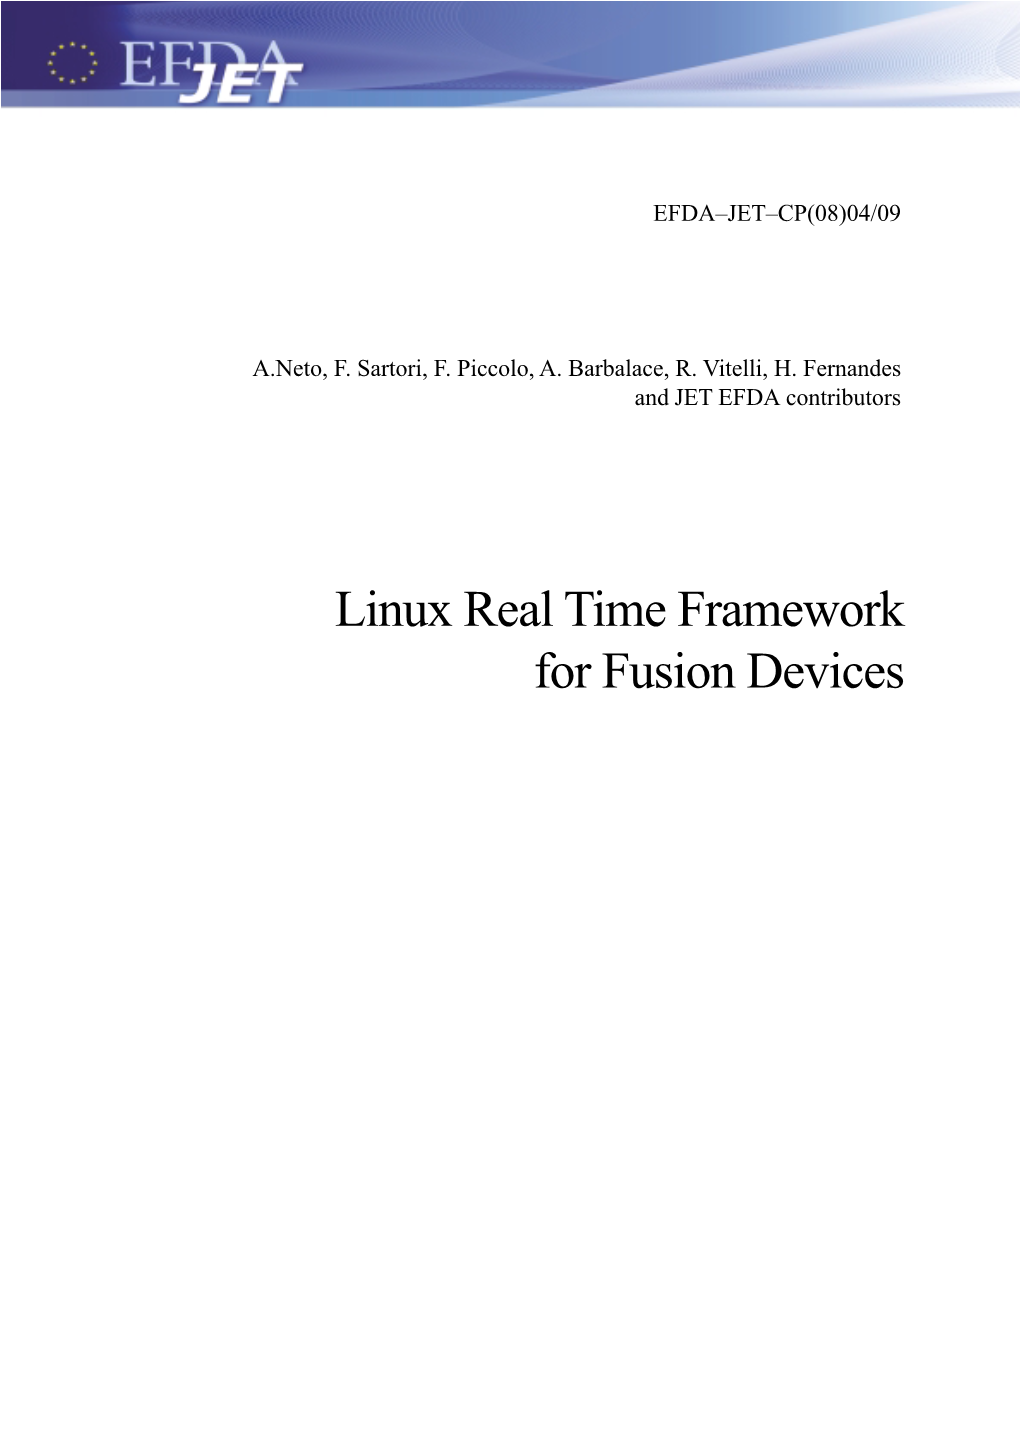 Linux Real Time Framework for Fusion Devices “This Document Is Intended for Publication in the Open Literature